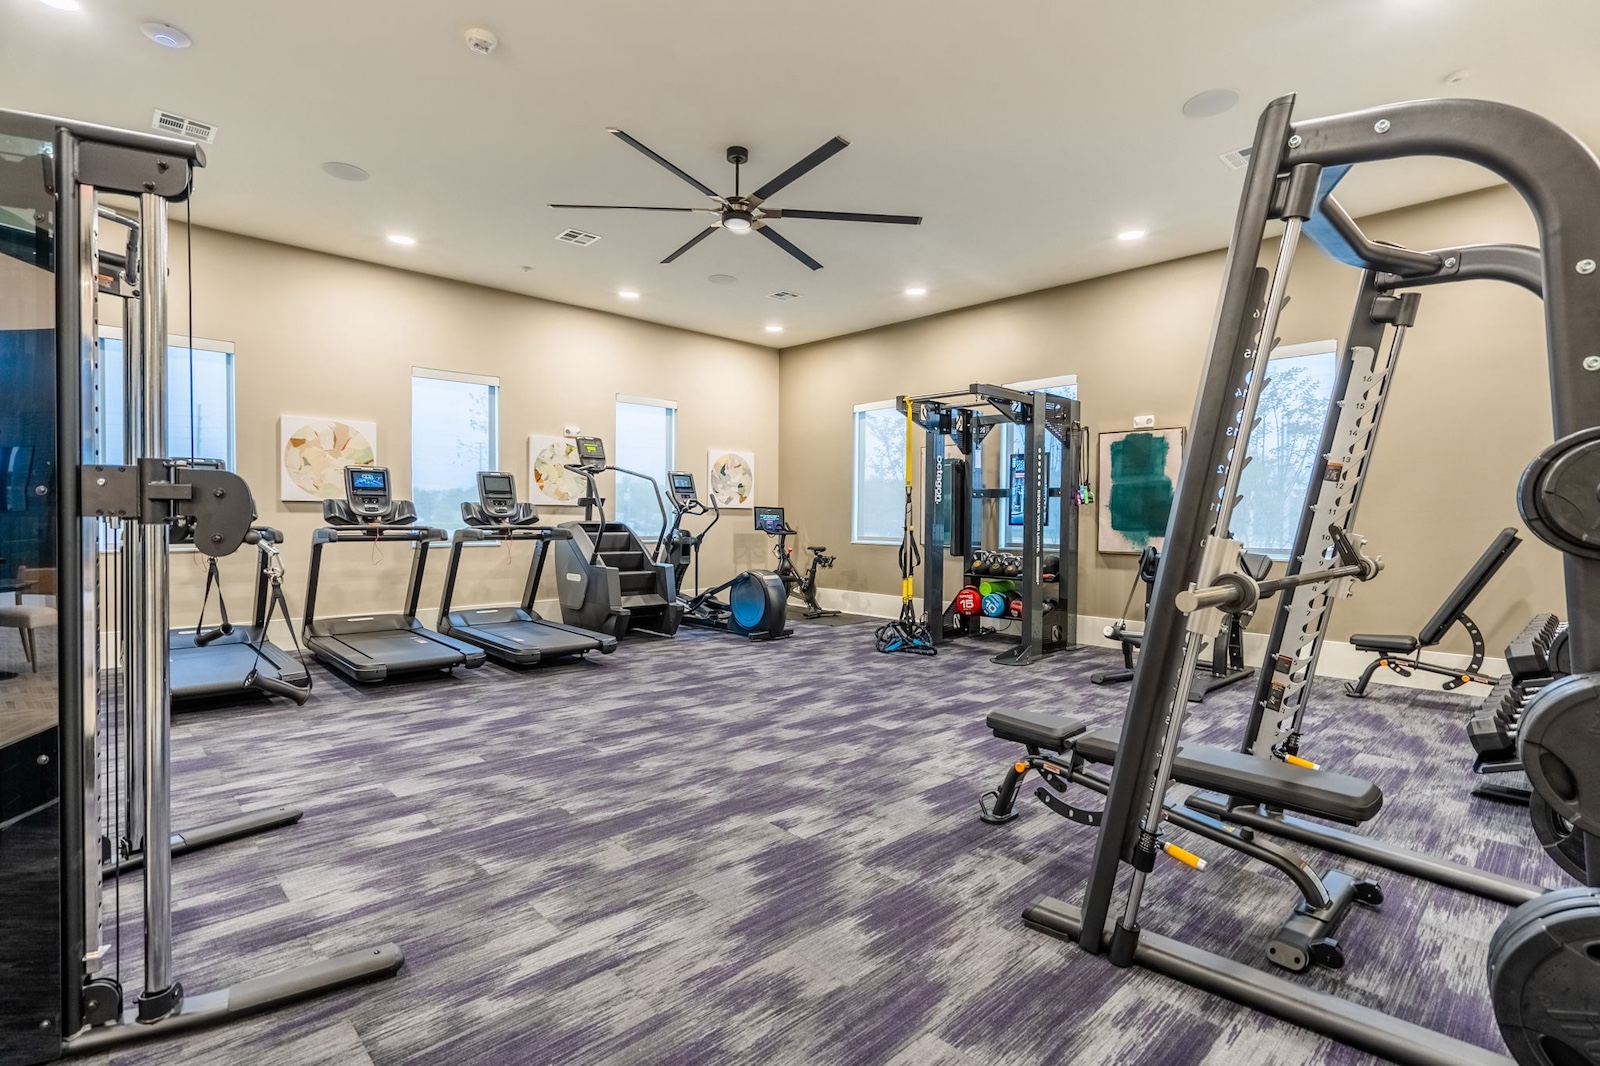 24/7 Fitness Center outfitted with superior equipment at our Cypress, TX apartments. Amenities